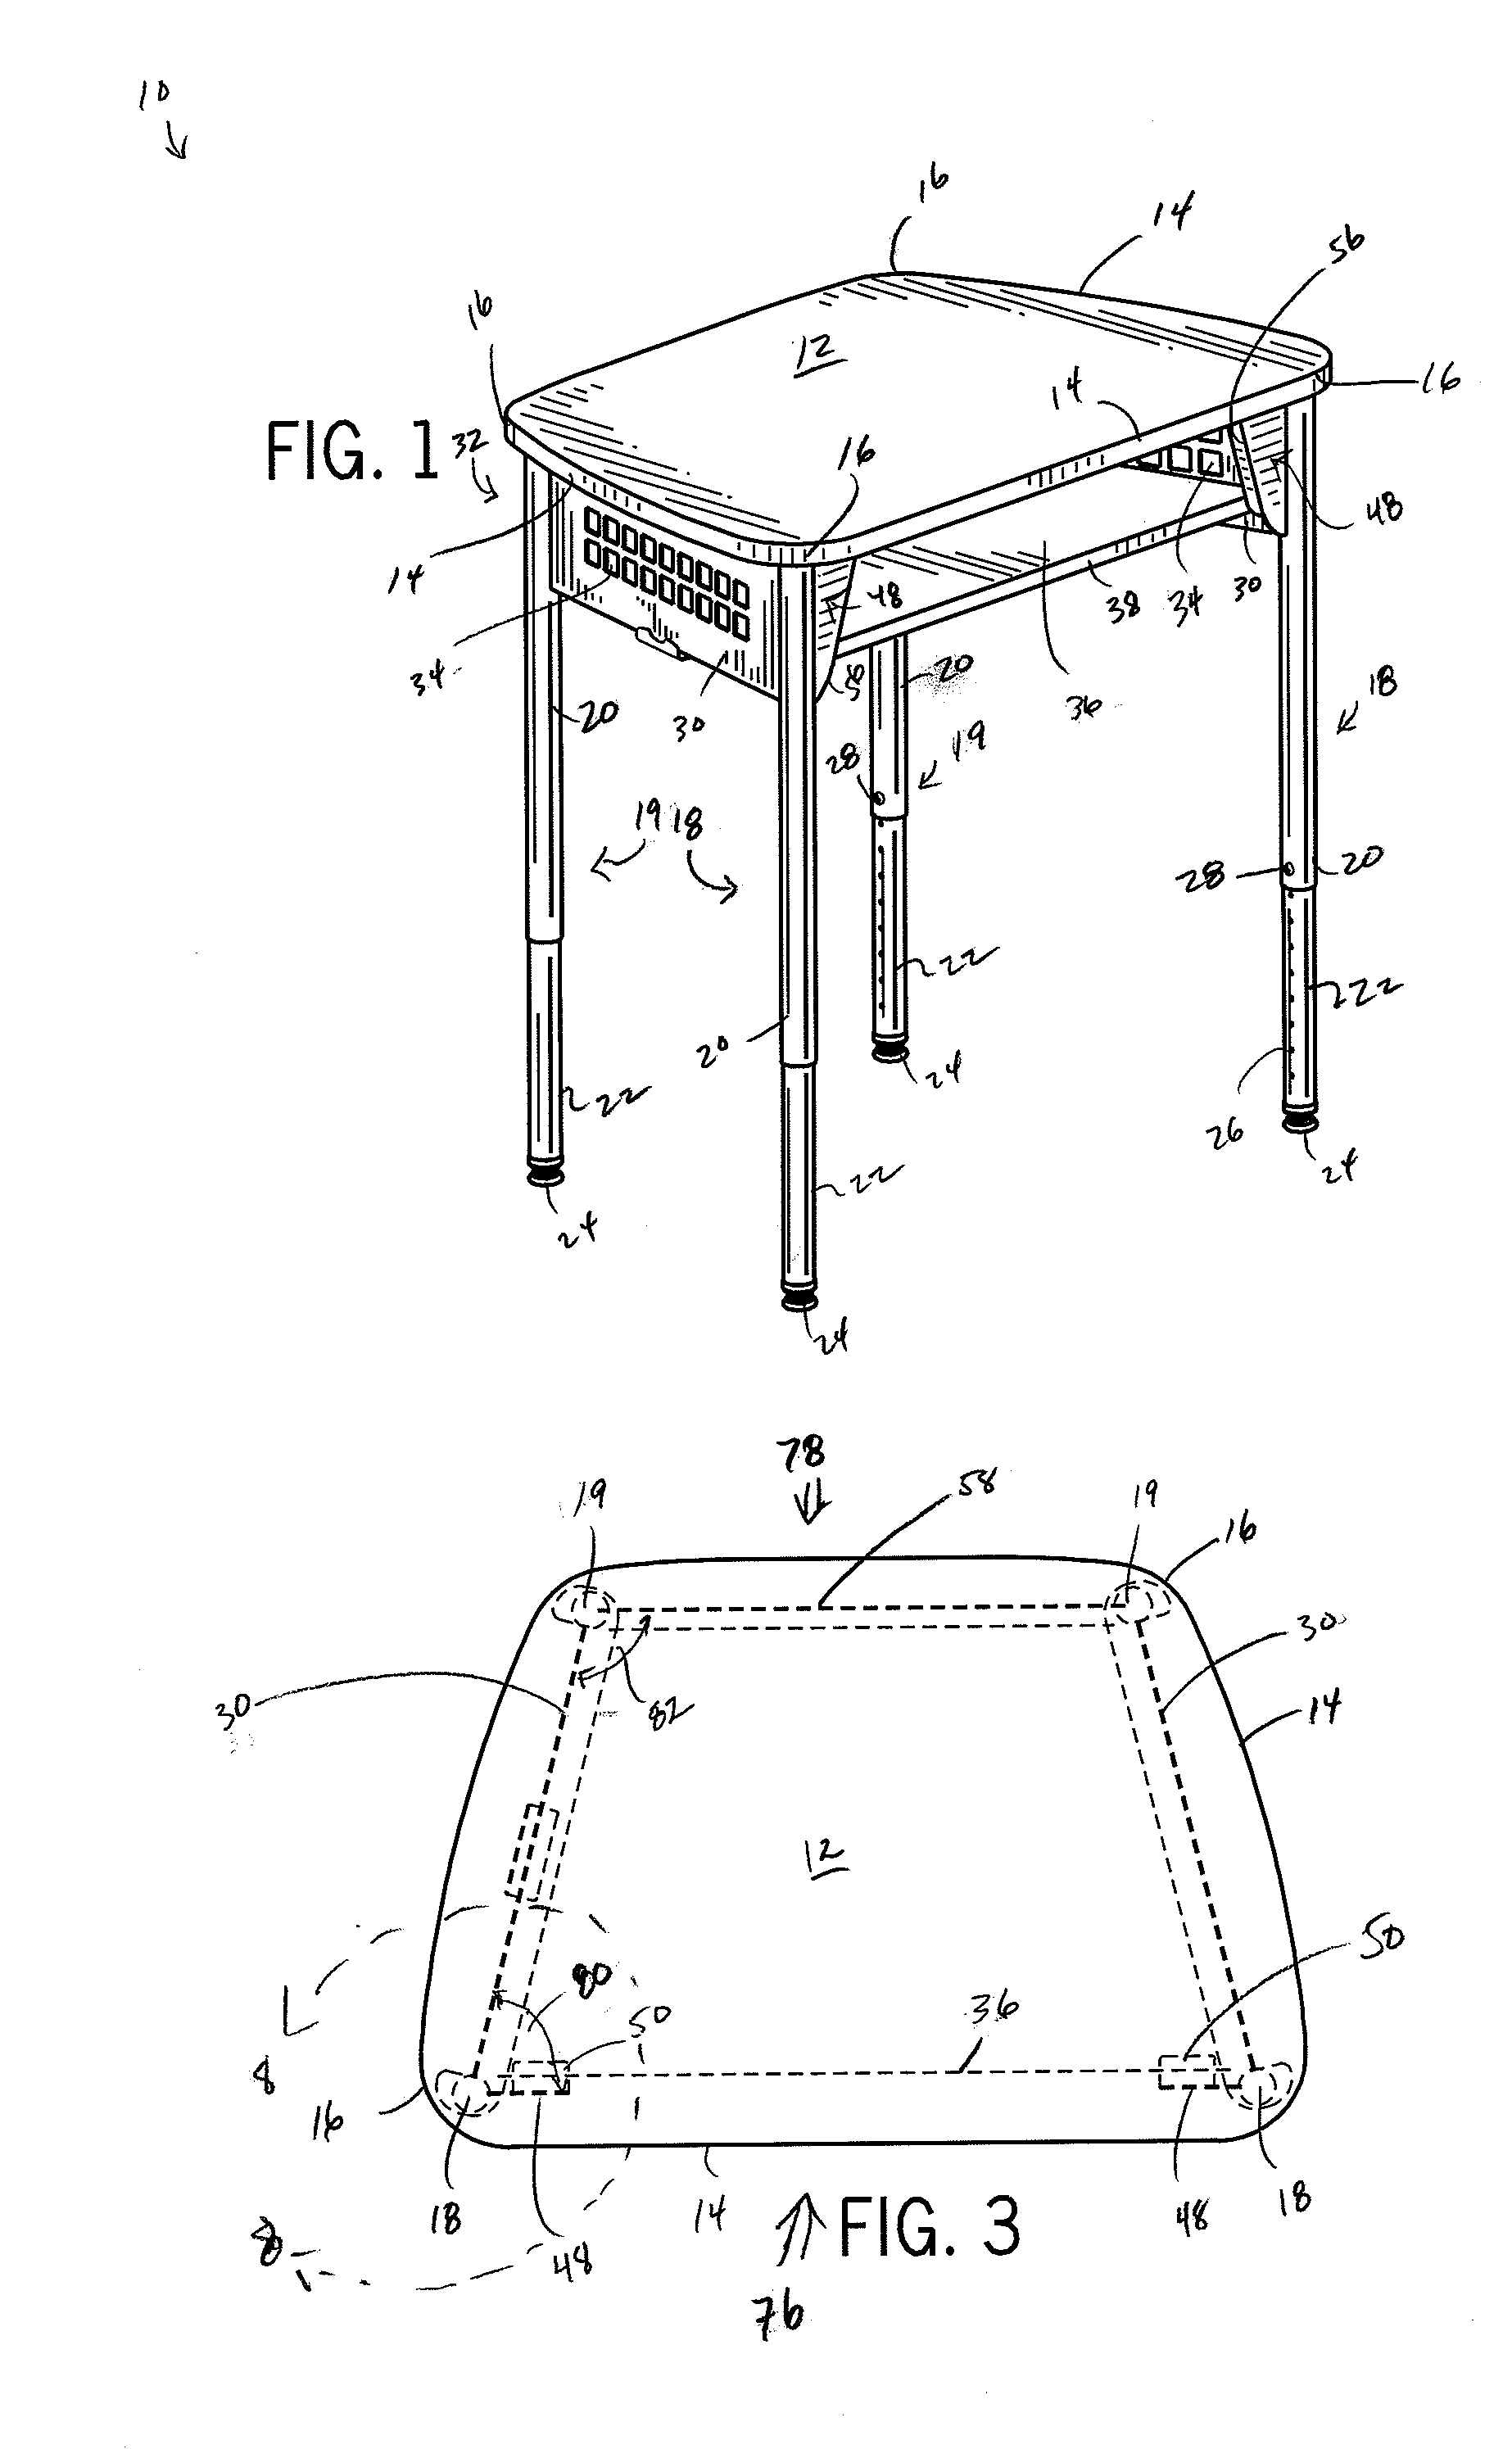 Variable Configuration Desk Having Worksurface Locking Feature